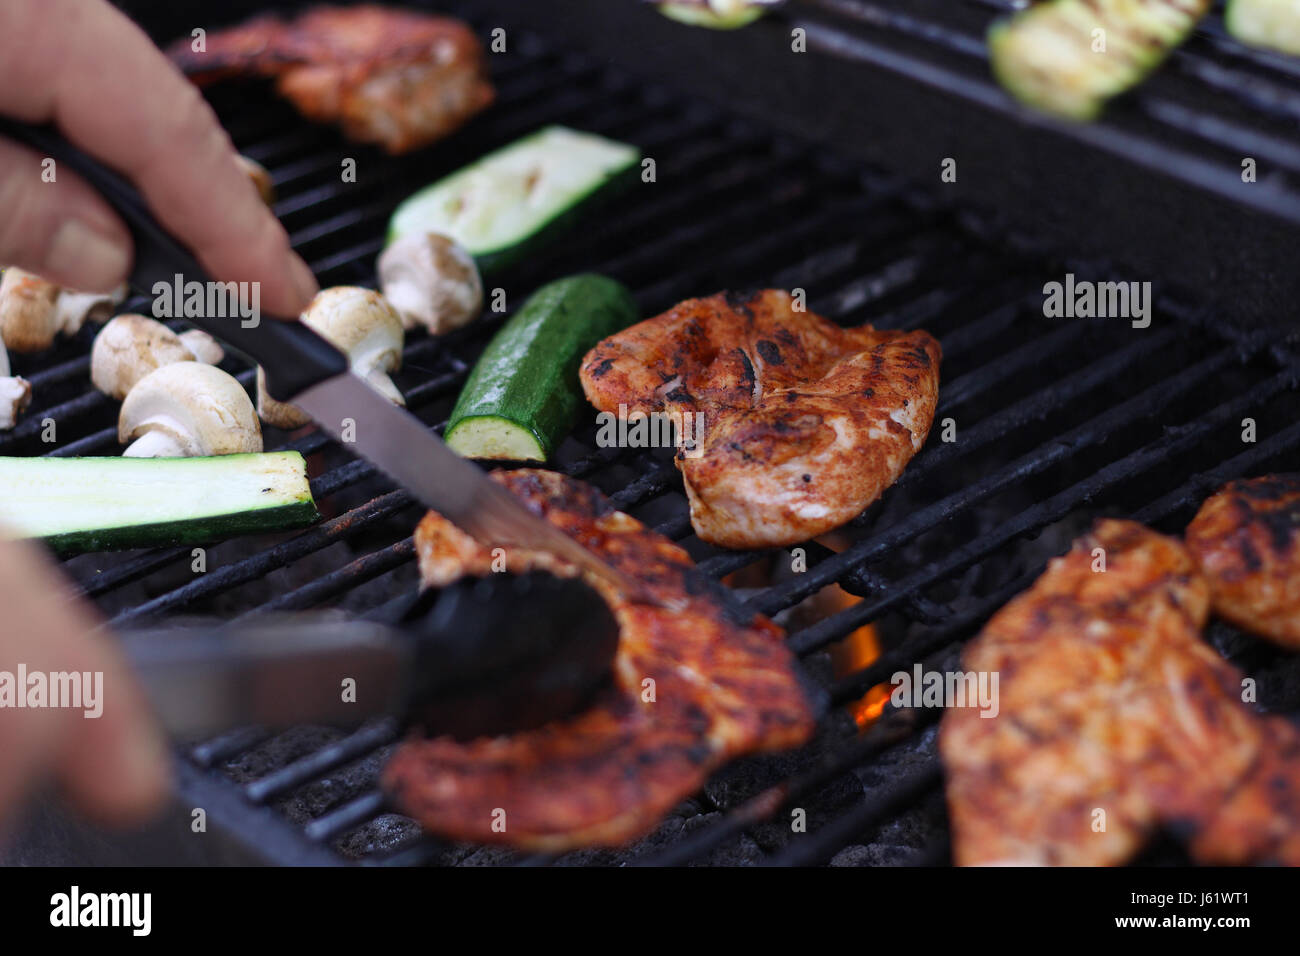 grilling with charcoal grill Stock Photo